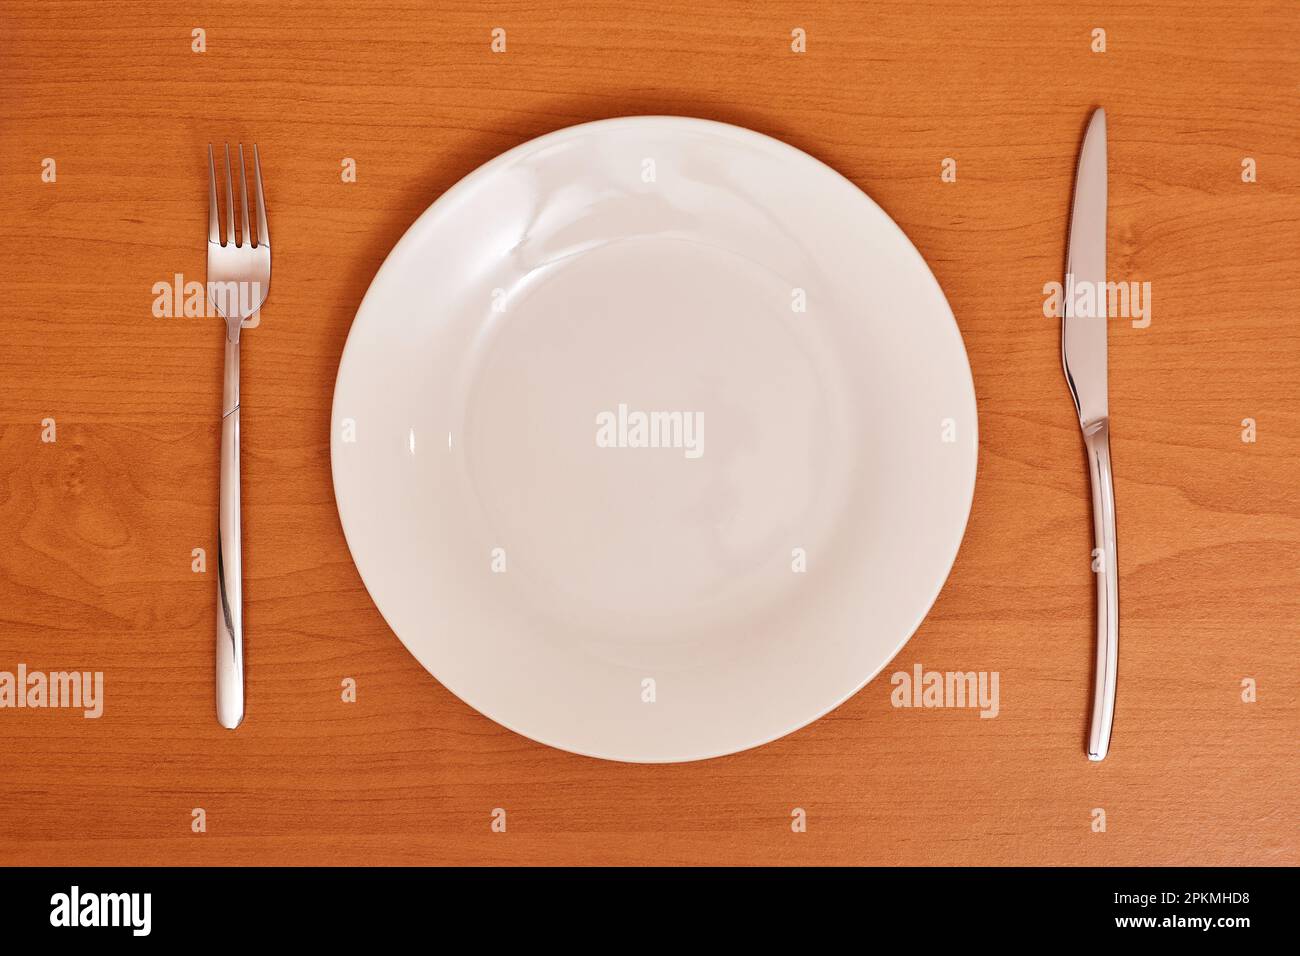 Empty and clean blue plate with fork and knife on a wooden table as an example of table etiquette Stock Photo